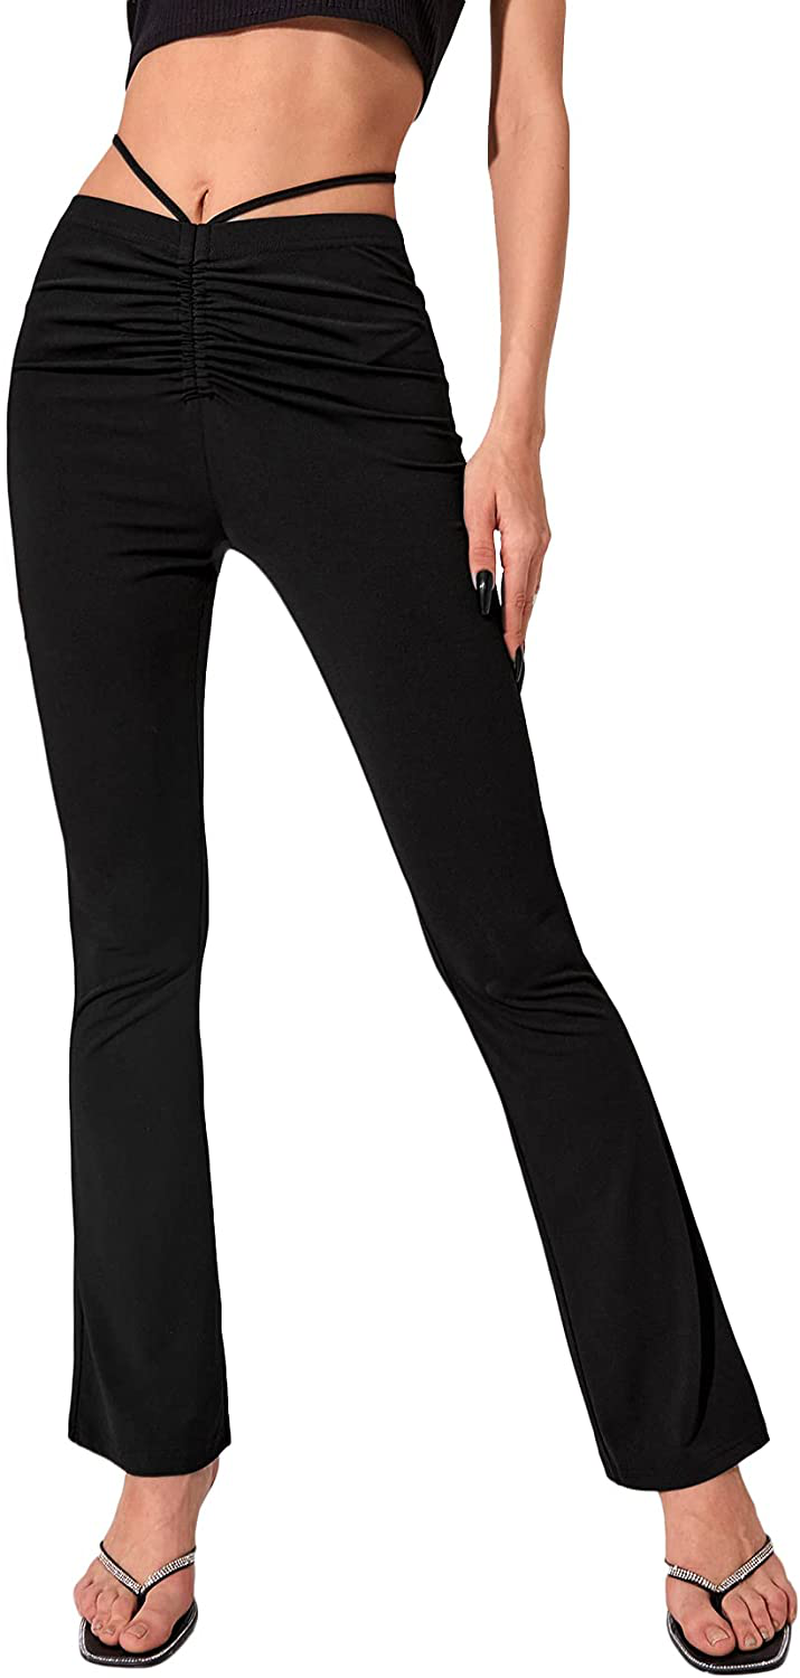 SheIn Women's High Waist Ruched Pants Cut Out Flared Leg Tie Back Trousers